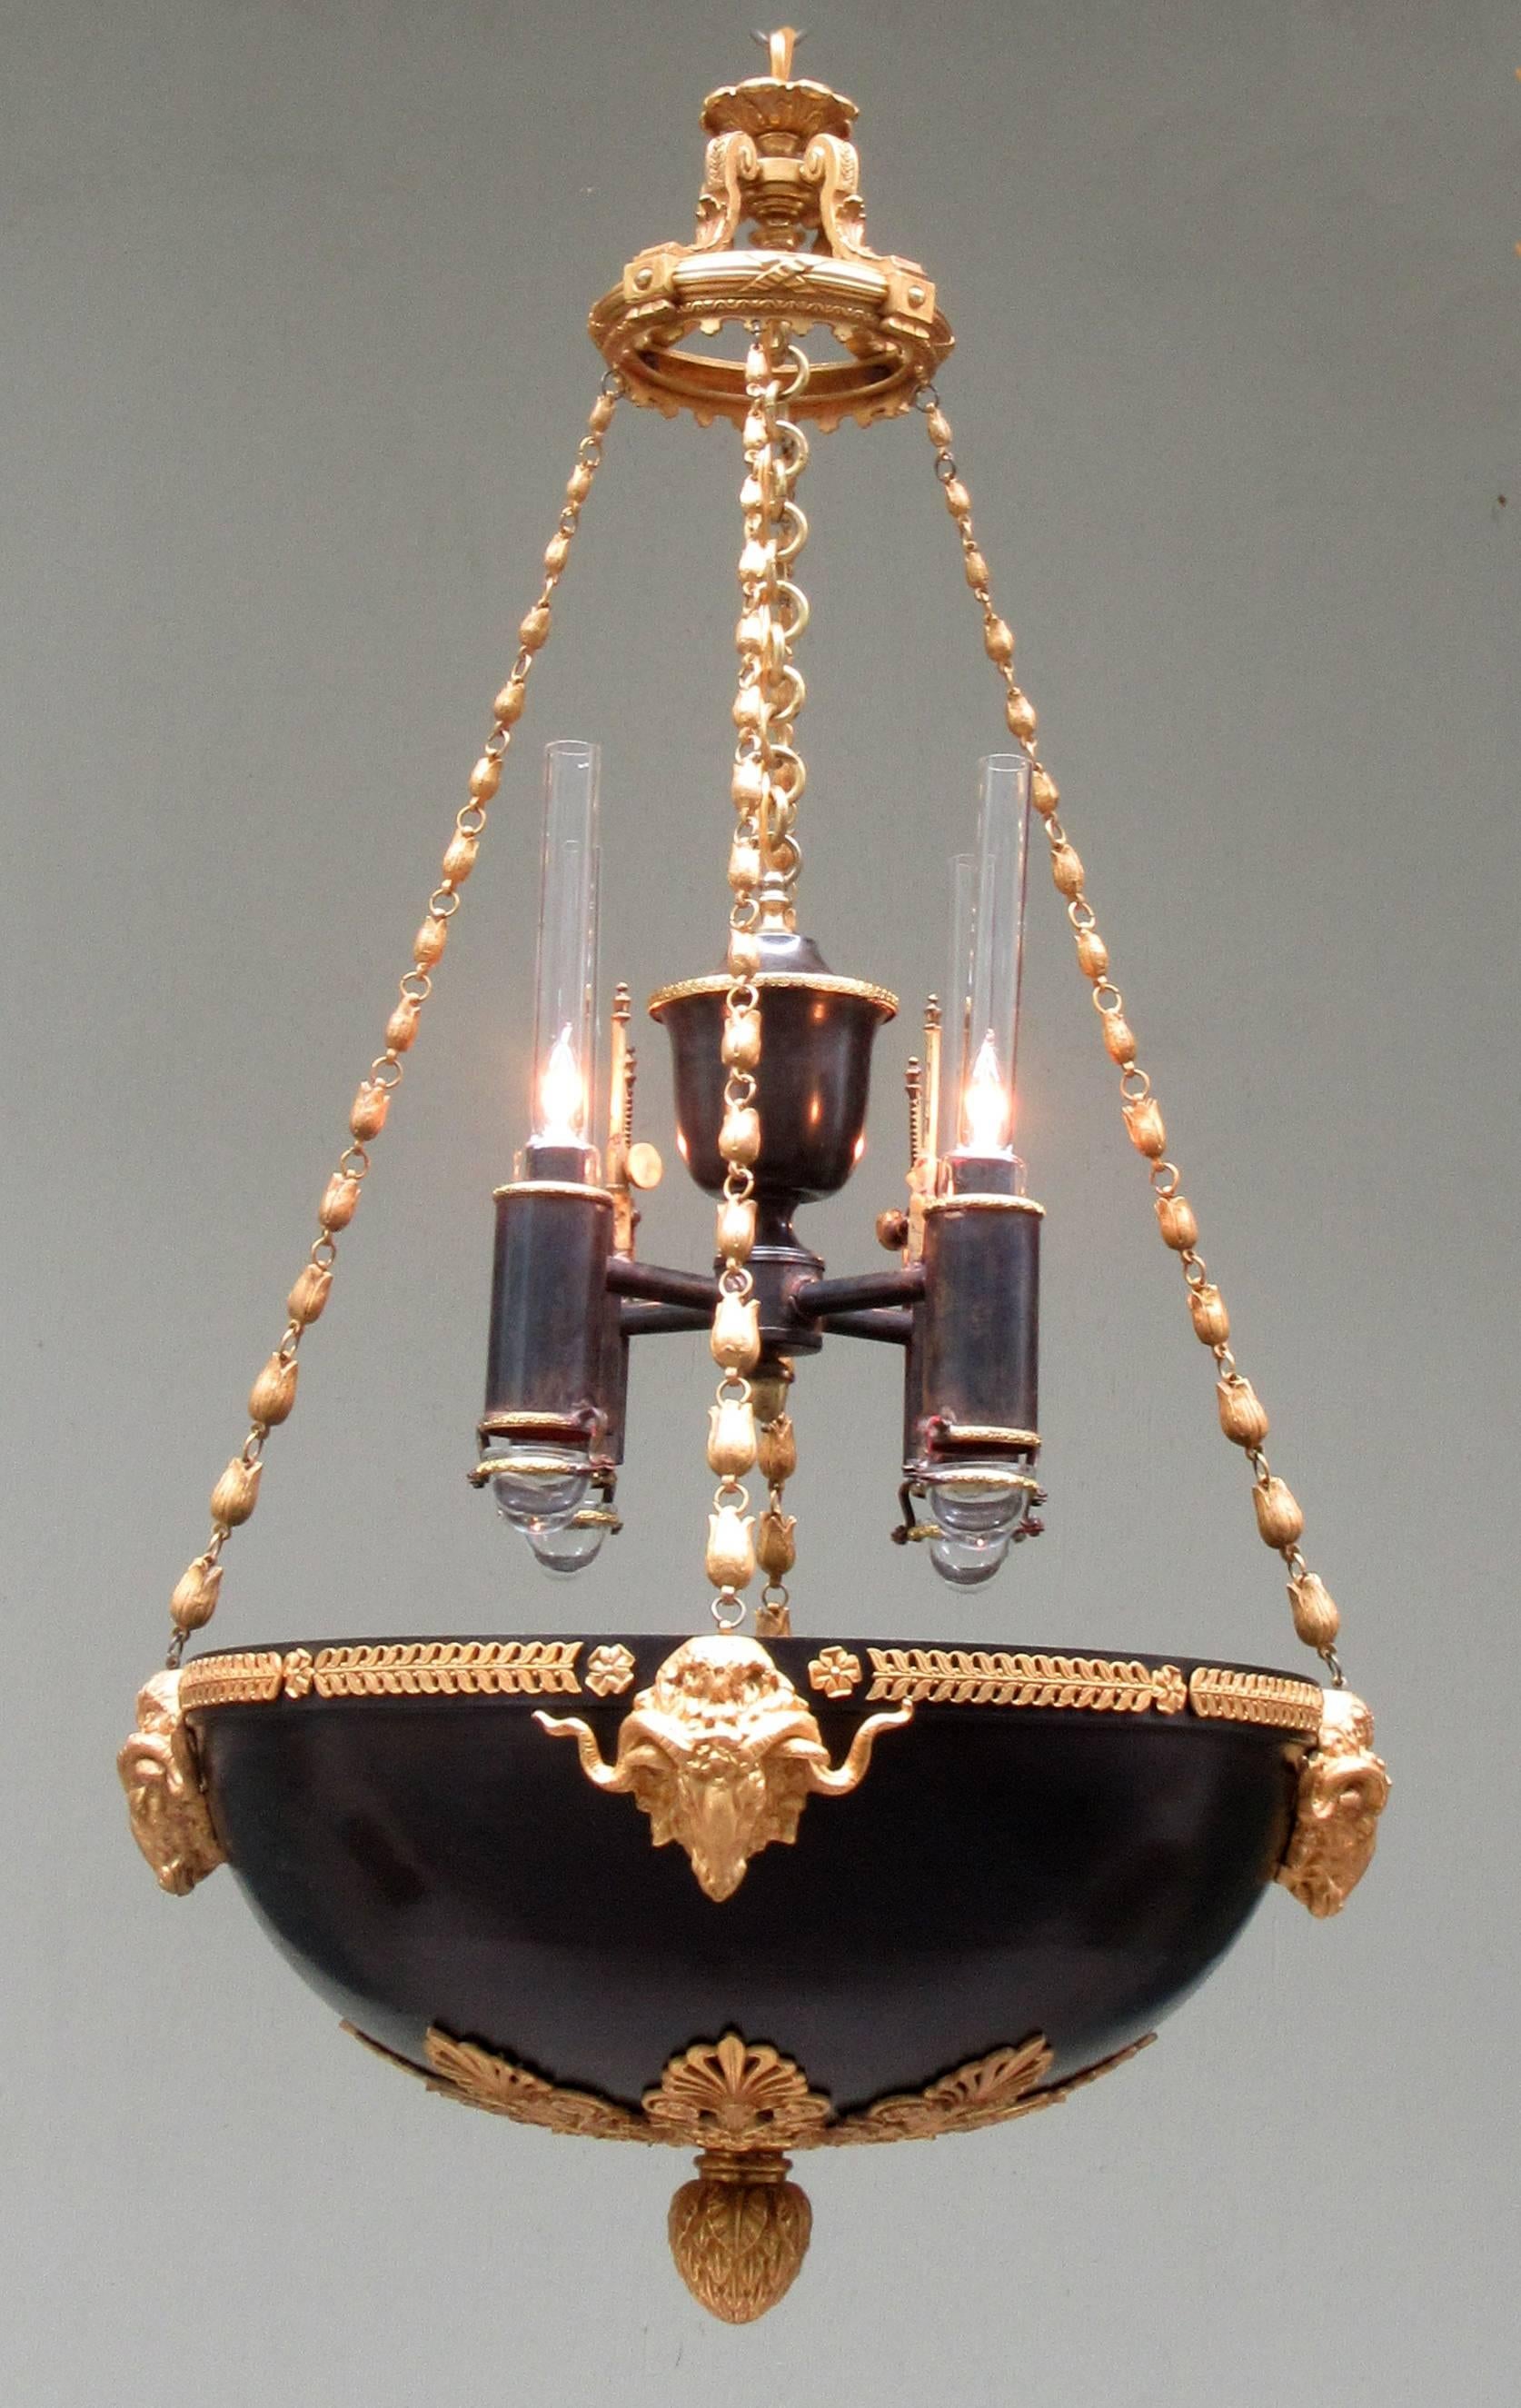 Gilt Pair of Early 19th Century English Regency Bronze Argand Pendant Chandeliers